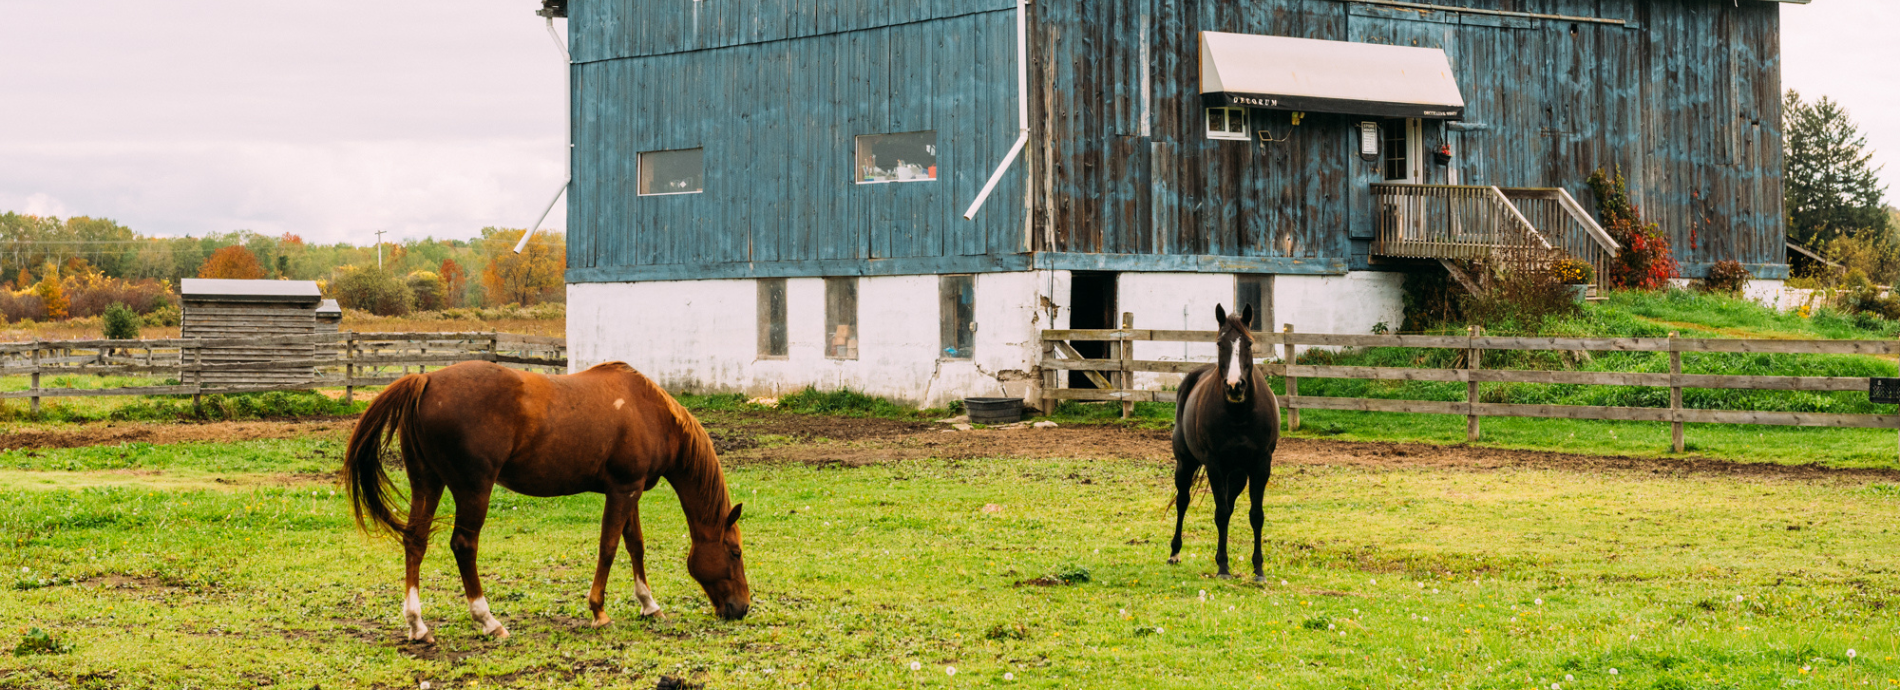 two horses standing in a paddock